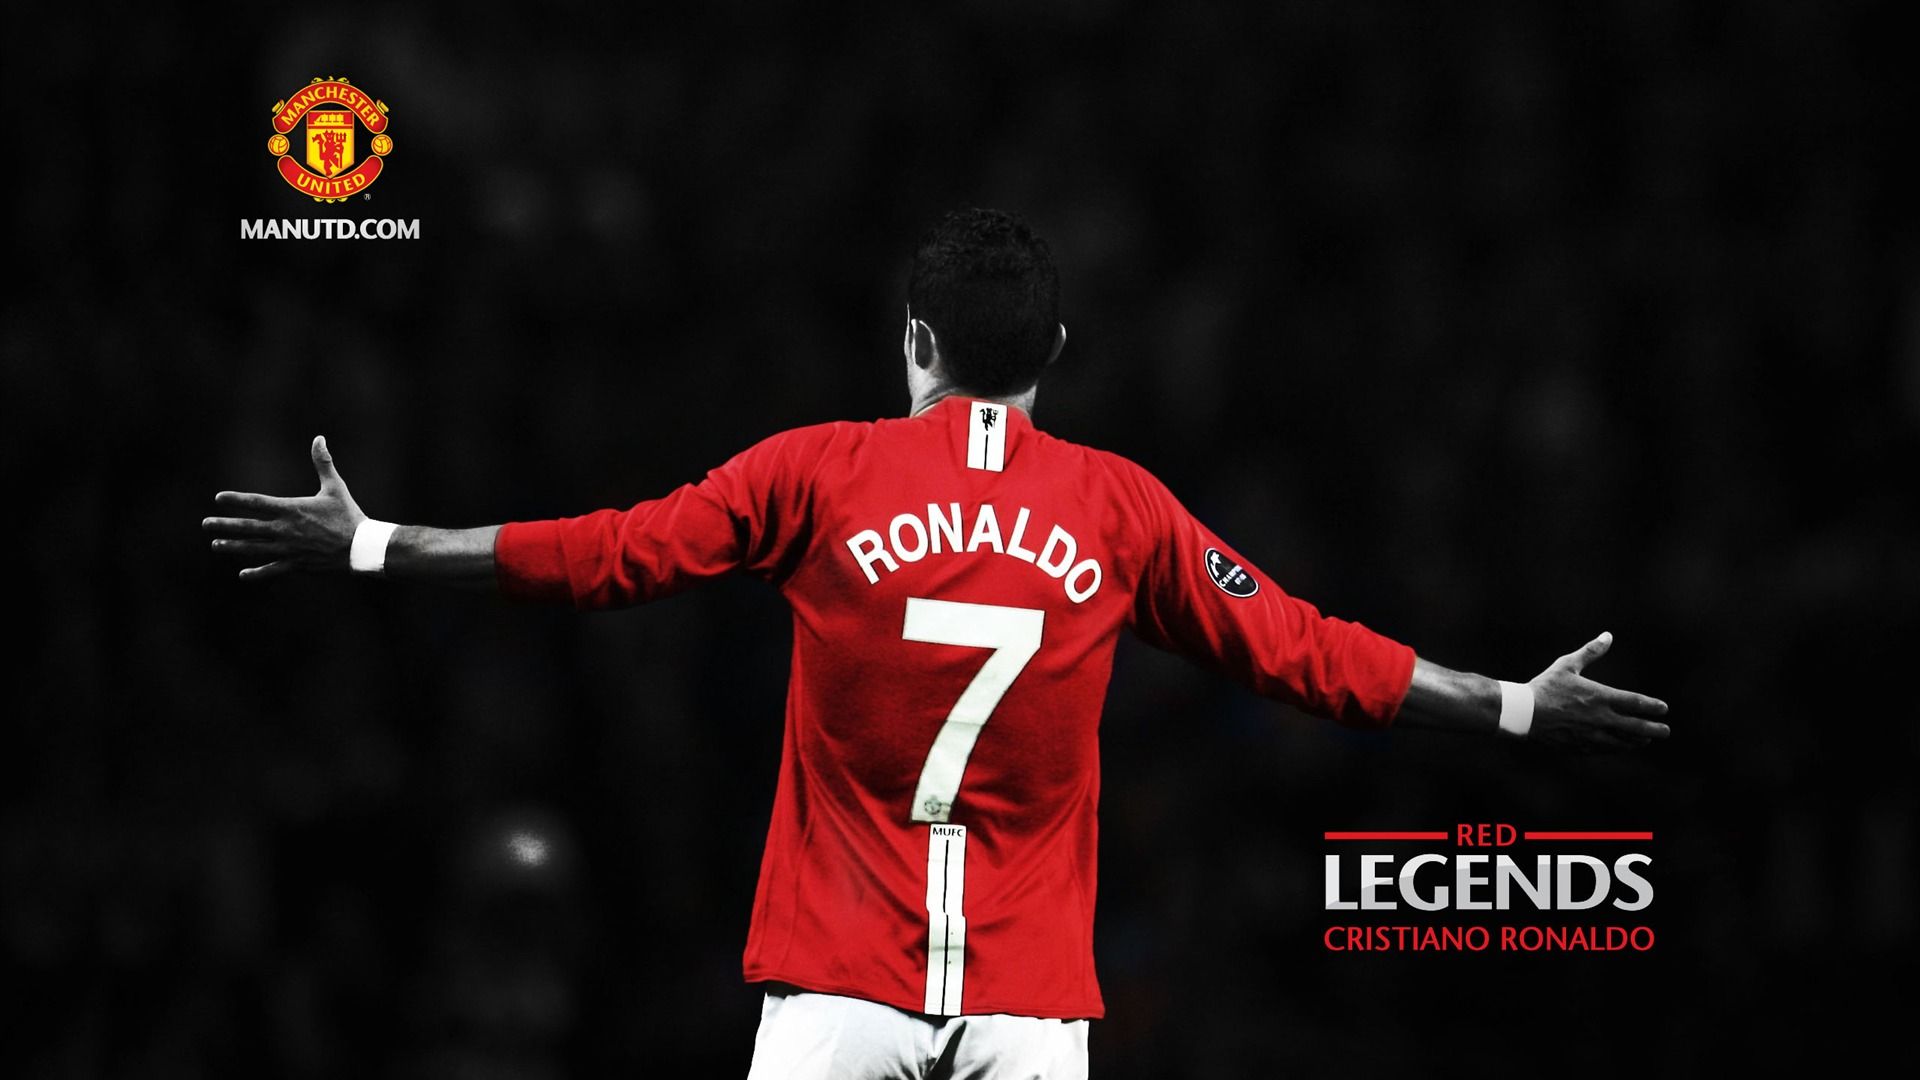 HD Quality Manchester United Wallpapers - SiWallpaper Tag 1